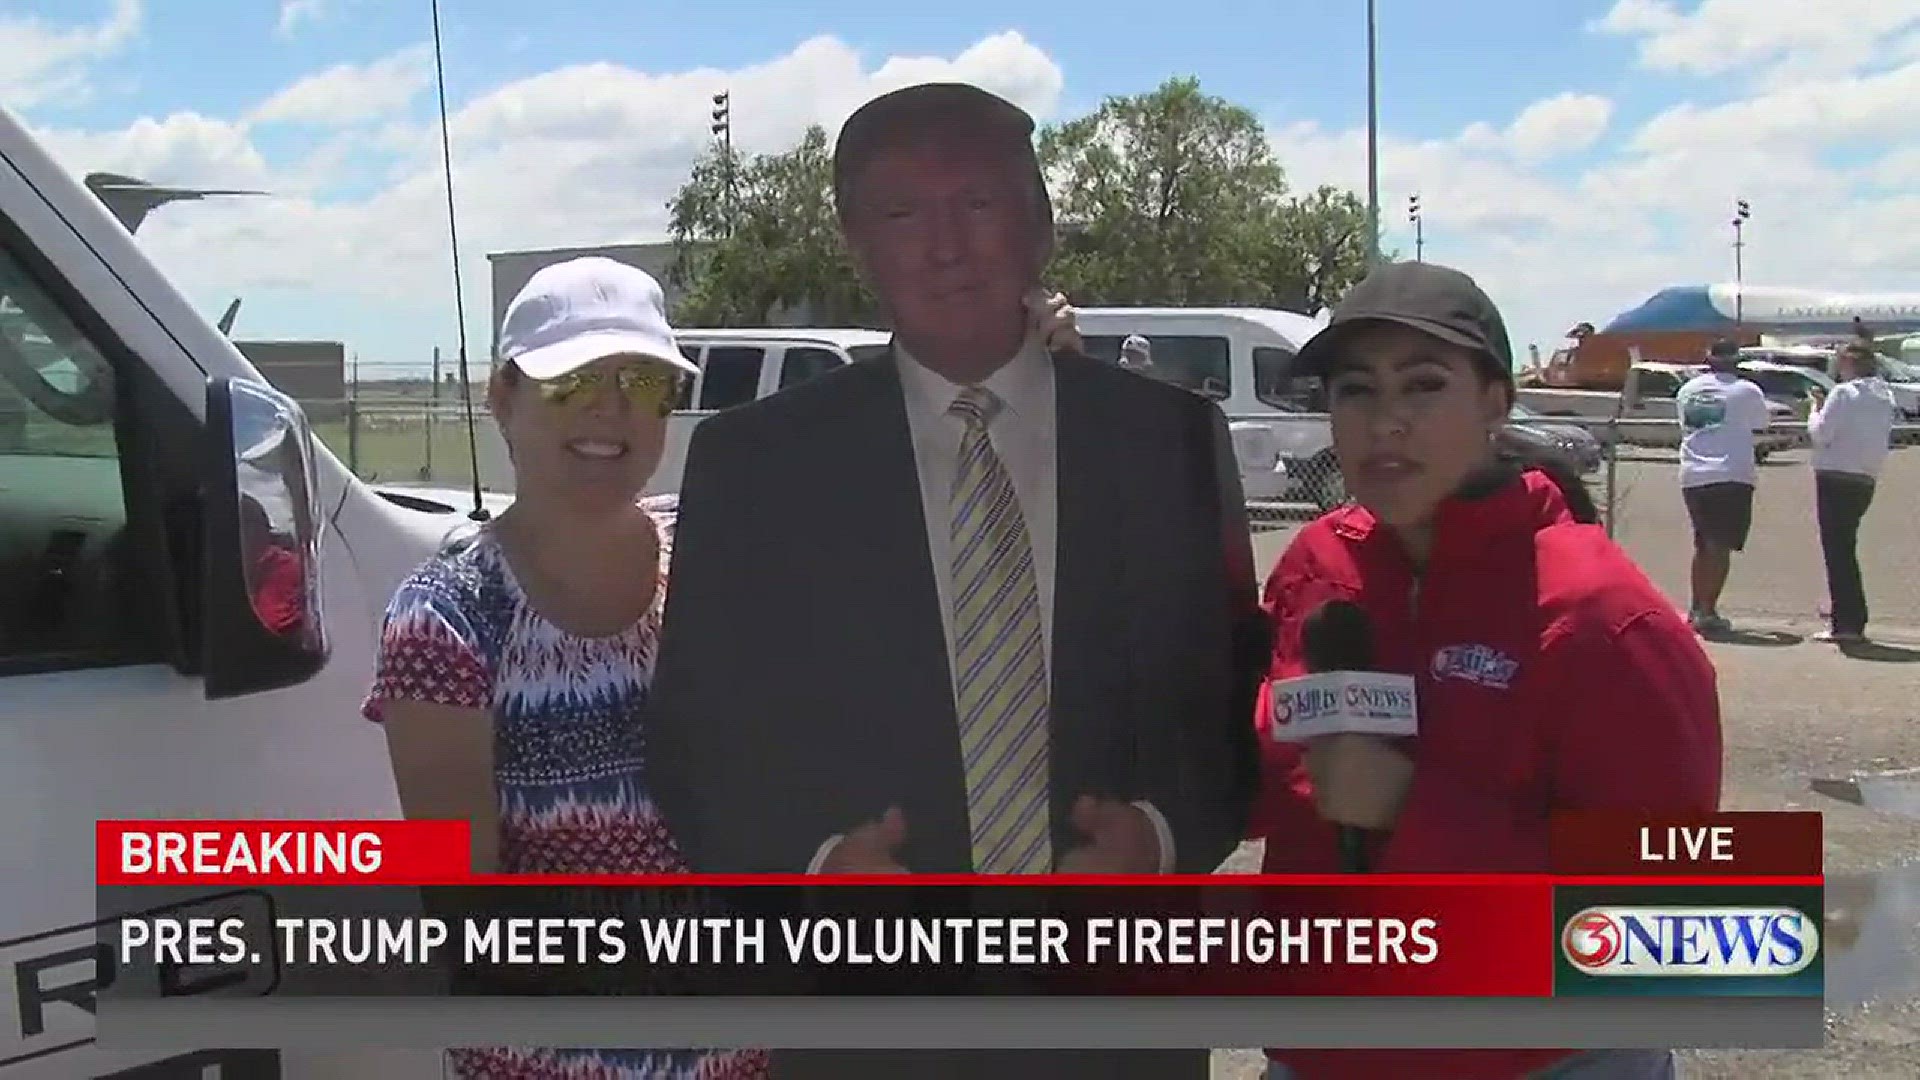 Supporters of Donald Trump were excited to see the president -- one woman brought her life-sized cutout of Trump.